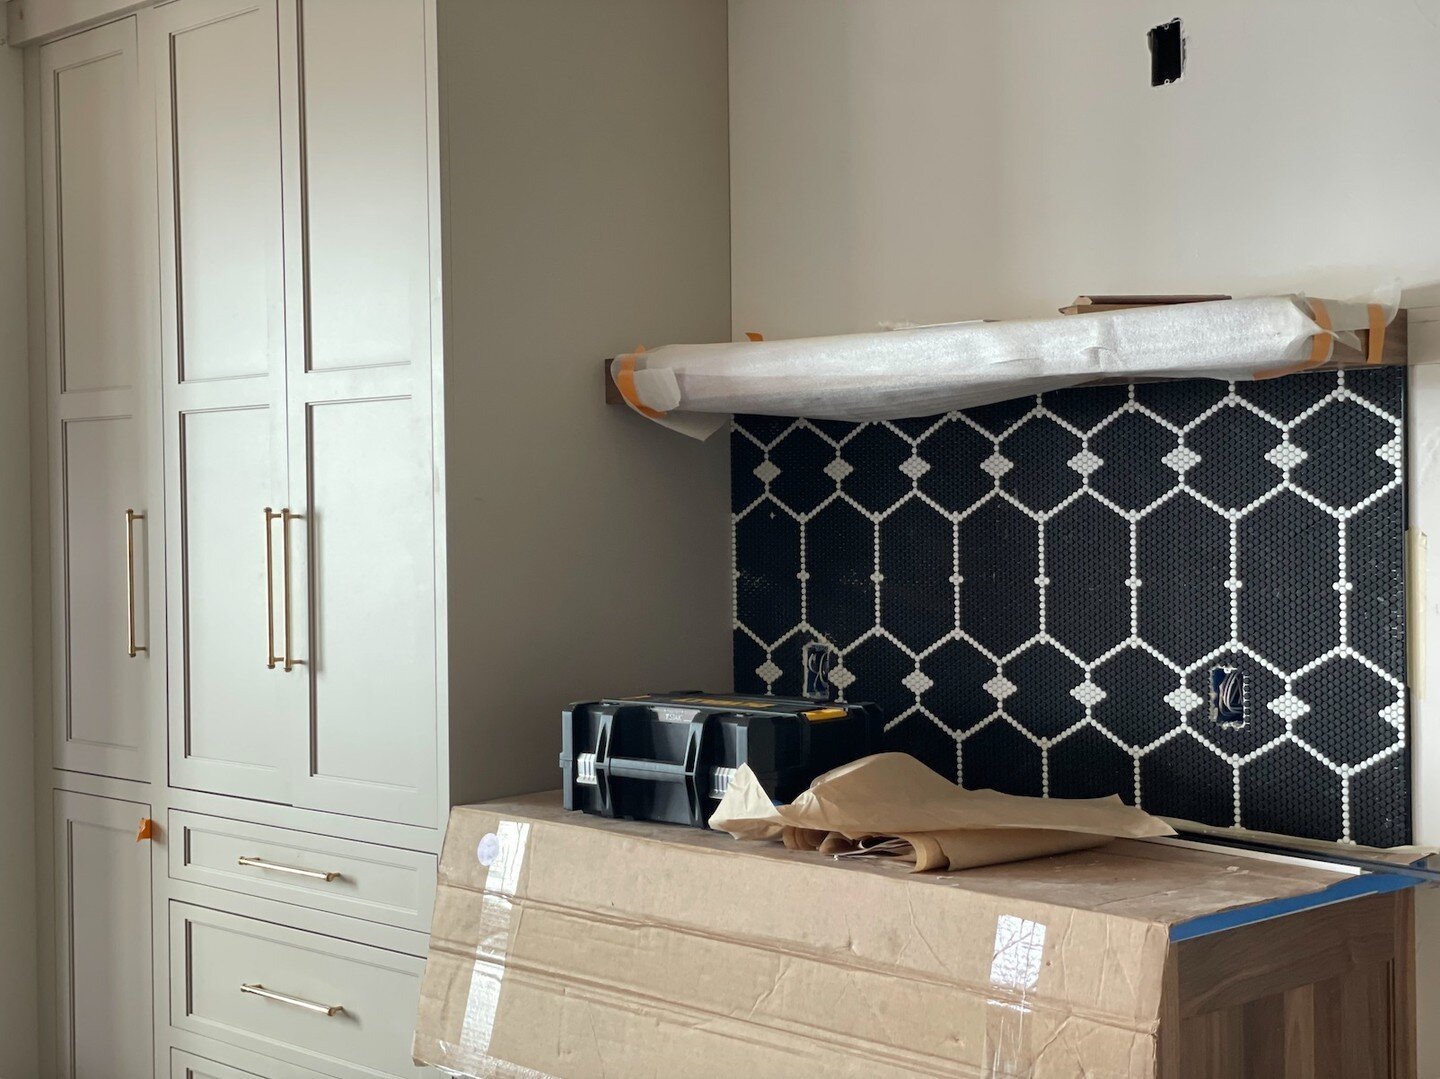 Just a sneak peek of one of our current kitchen renovations in Colorado! 😍

We can't wait to see the finished product and share it with all of you! Stay tuned for more updates and progress shots. 🙌